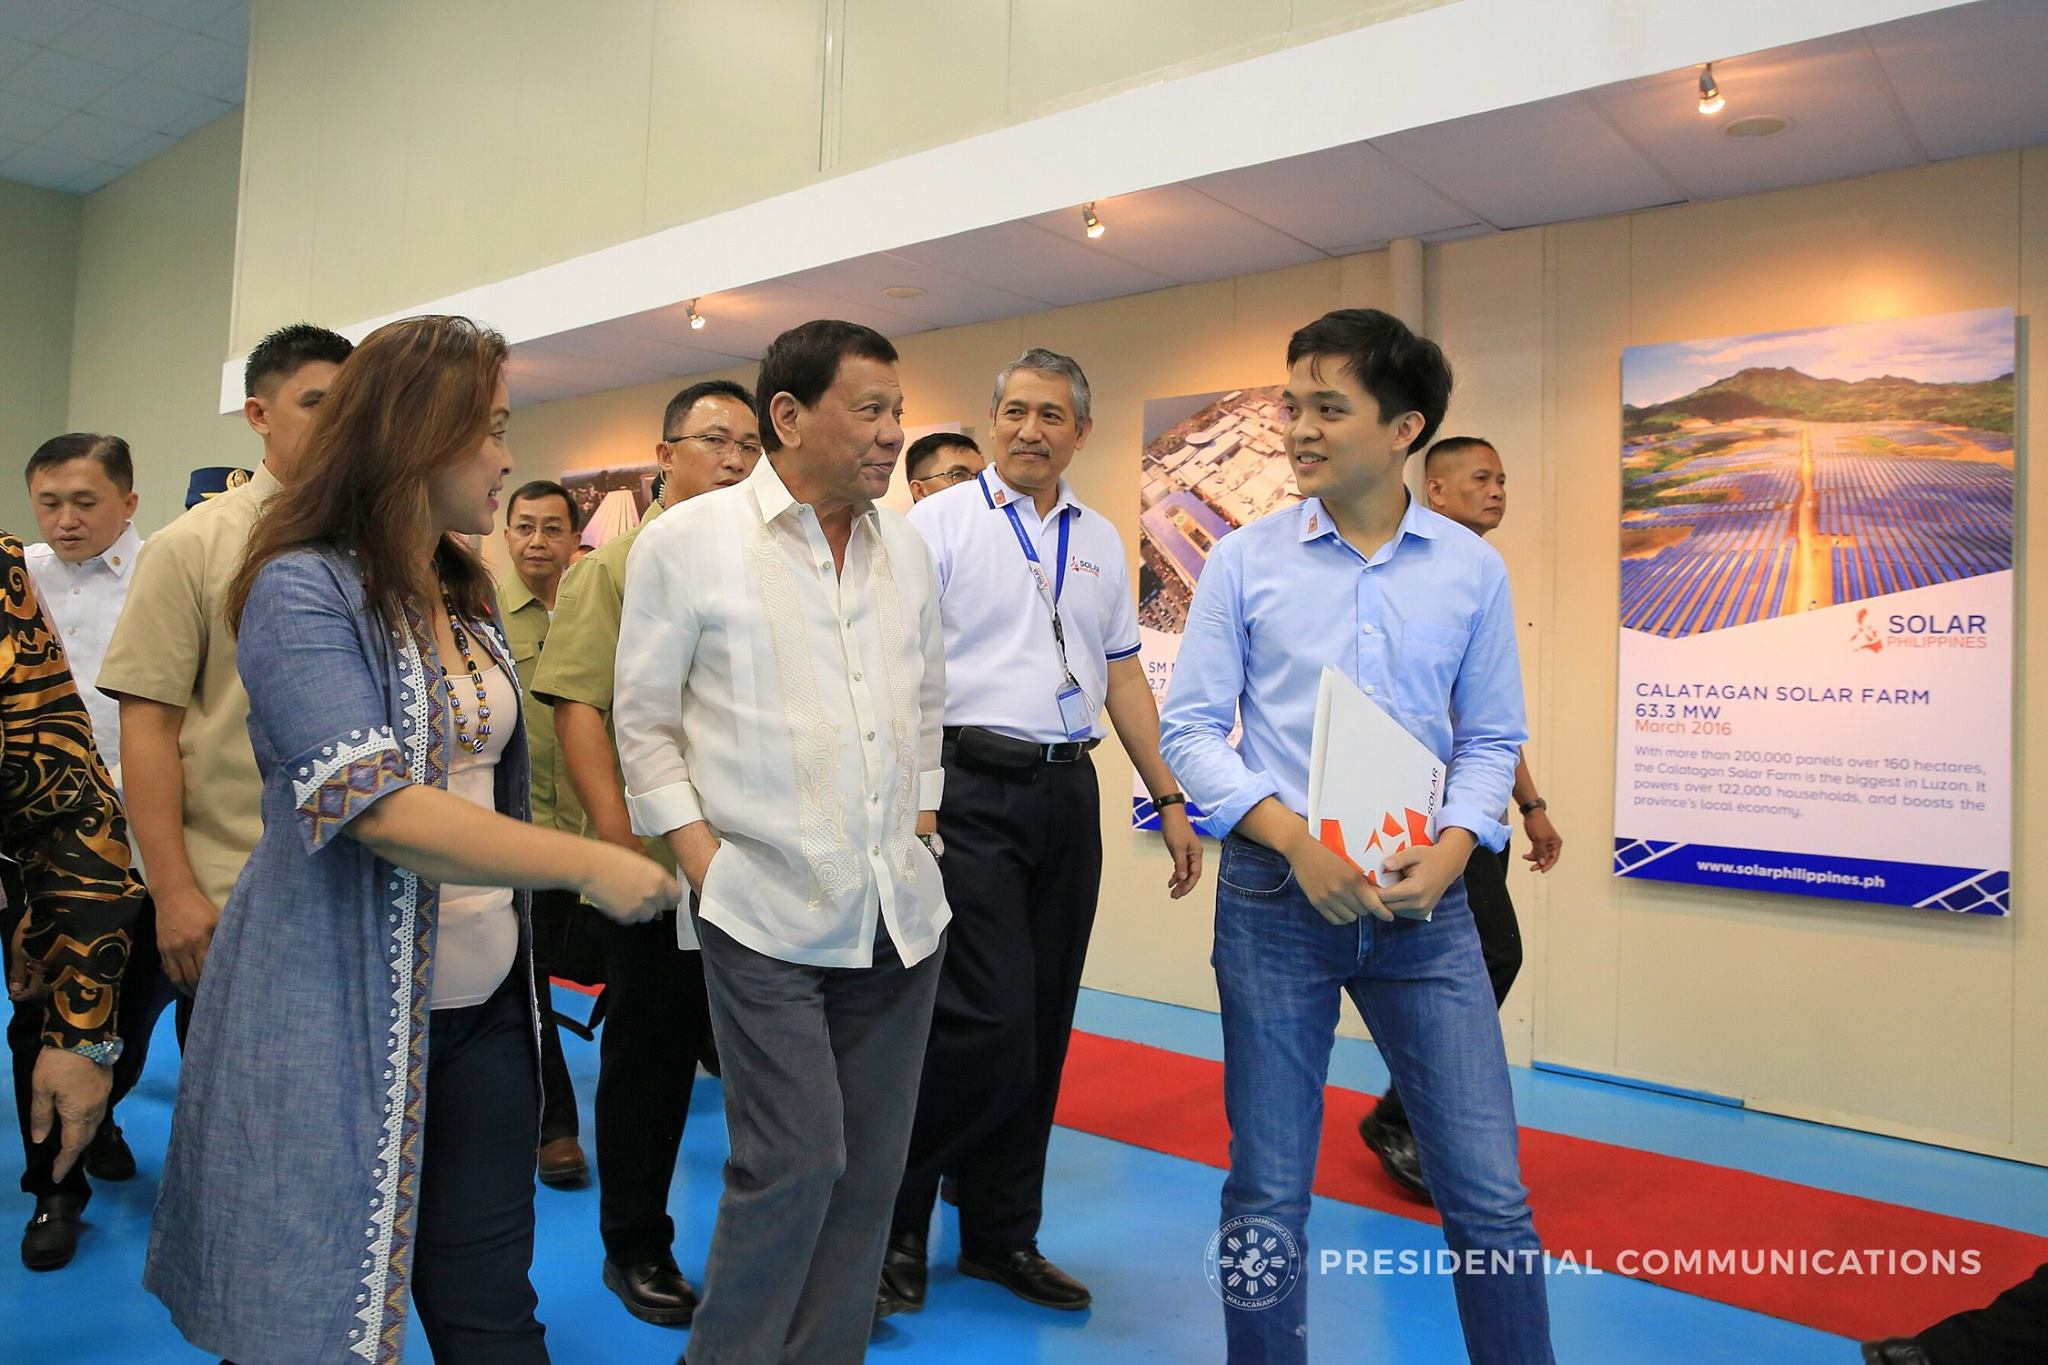 Solar Philippines founder and president Leandro Leviste welcomes then President Rodrigo Duterte and his mother, Sen. Loren Legarda, at the firm’s factory in Sto. Tomas, Batangas. Solar Philippines would be granted a 25-year franchise in 2019. (Photo from the Facebook page of the Presidential Communications Office, August 2017)